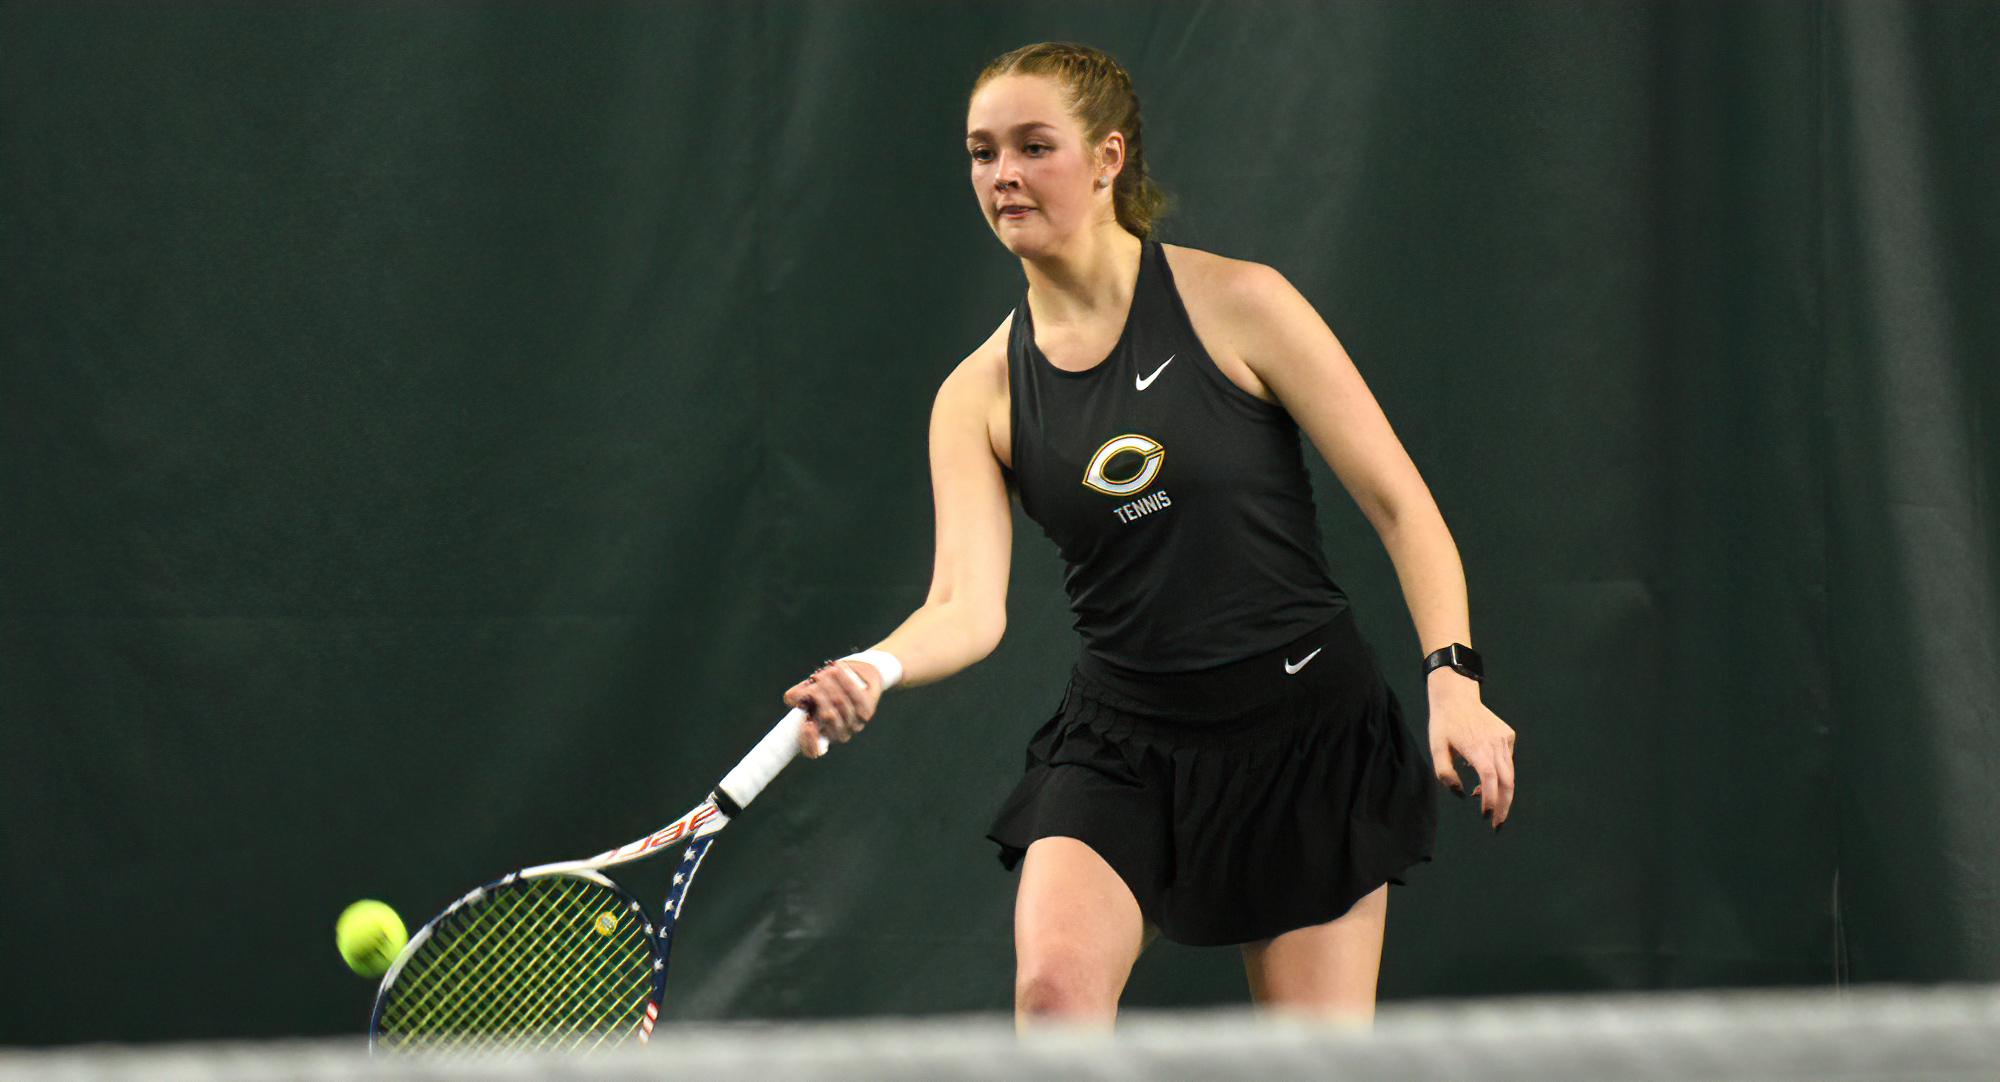 Senior Raquel Egge won the match-deciding singles bout in the Cobbers' 5-4 win over Ursinus (Pa.) in the team's first match in Florida.